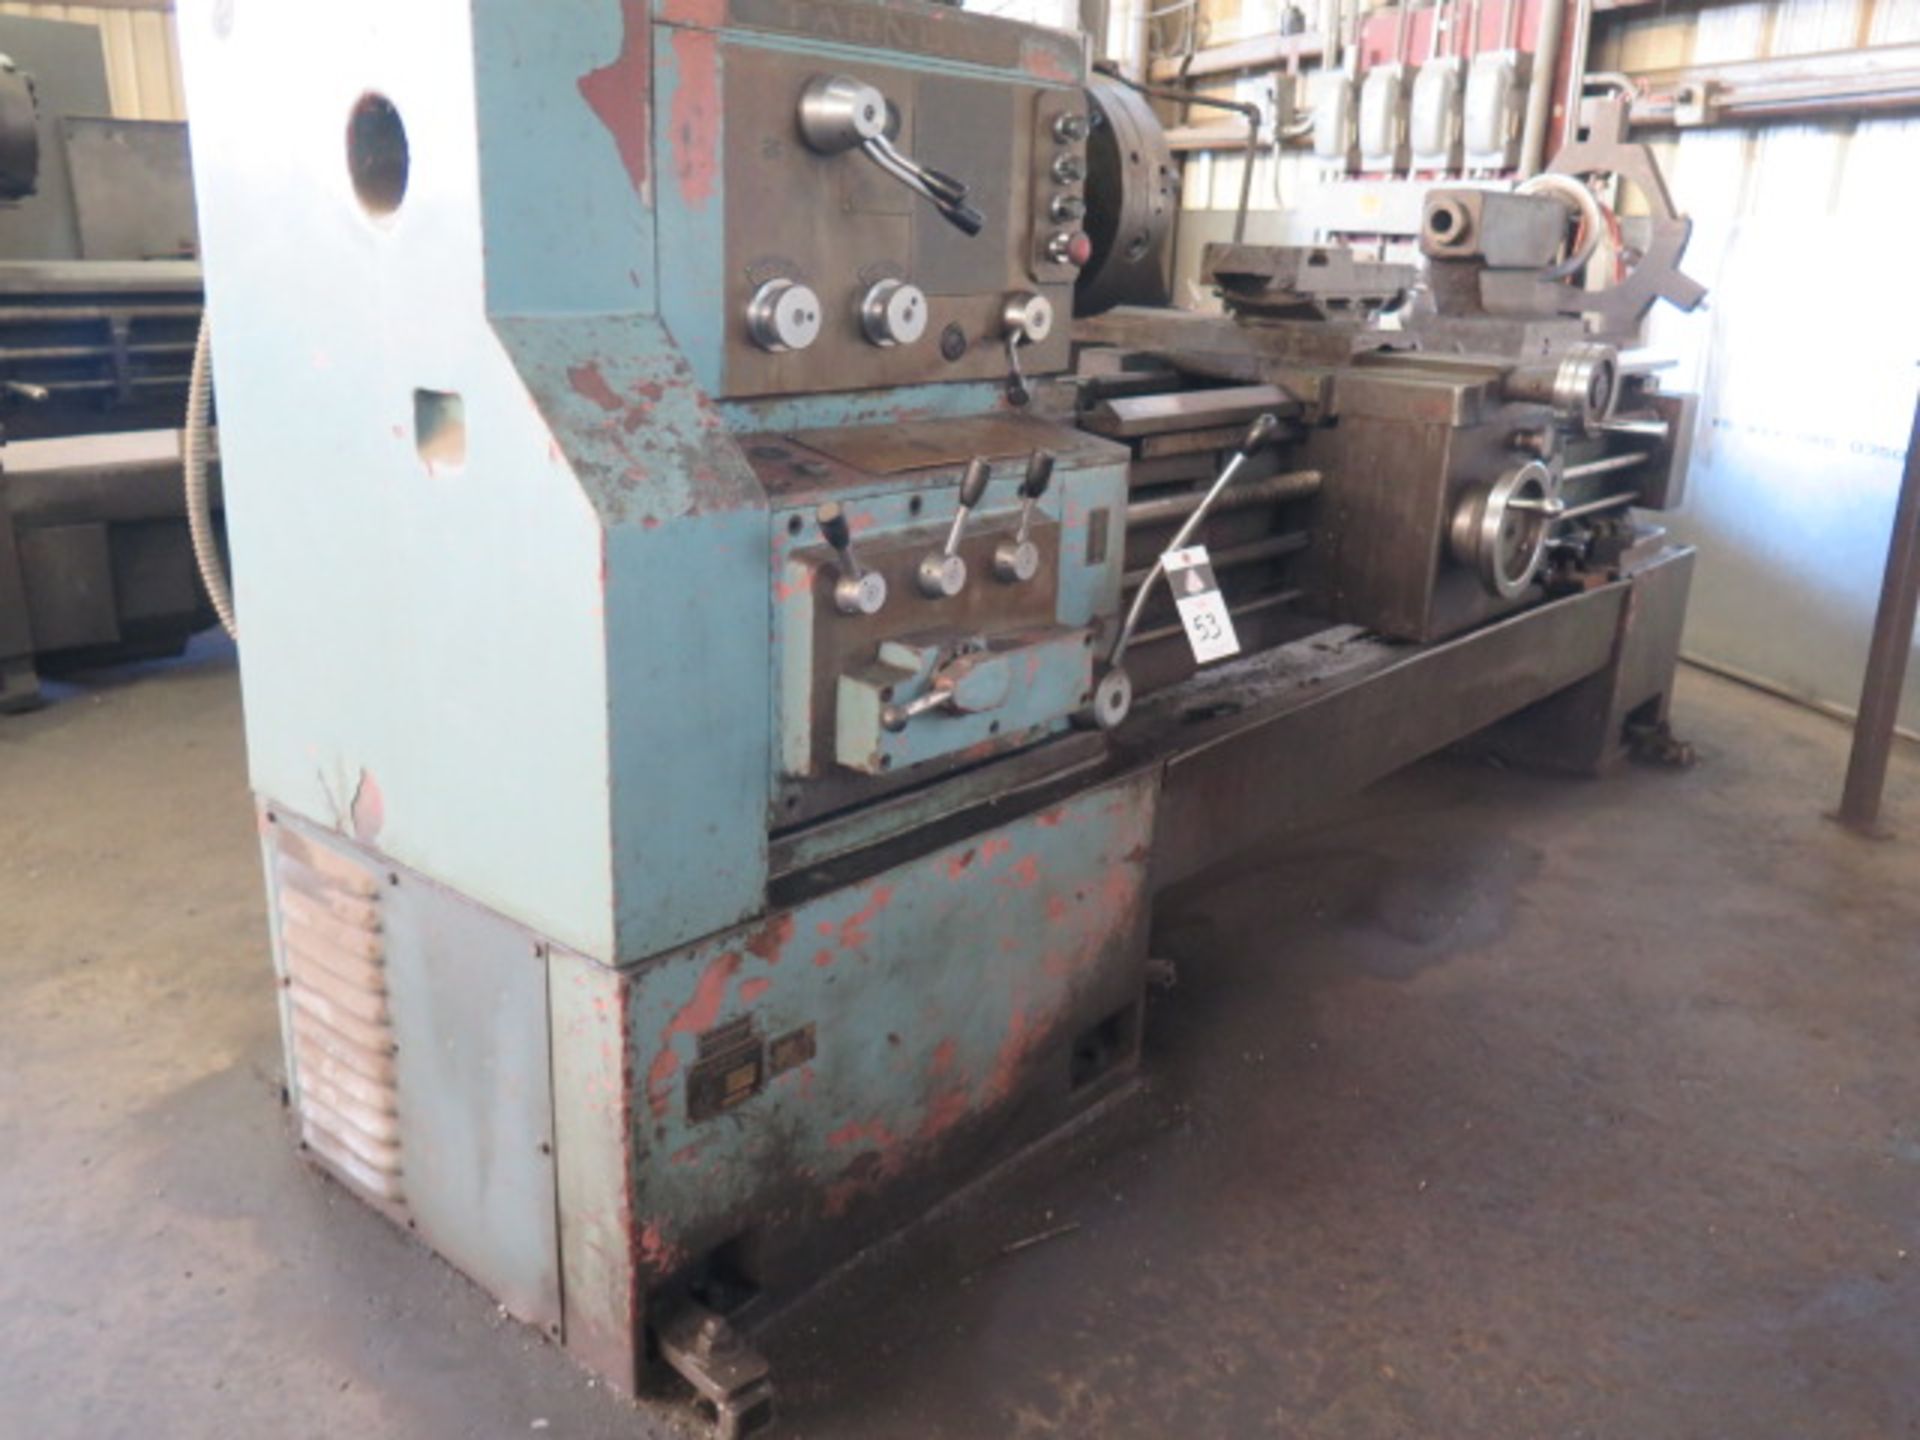 Tarnow TUJ-50 21” x 65” Geared Head Gap Lathe s/n 1300 w/ 71-1800 RPM, Inch/mm Threading, SOLD AS IS - Image 2 of 9